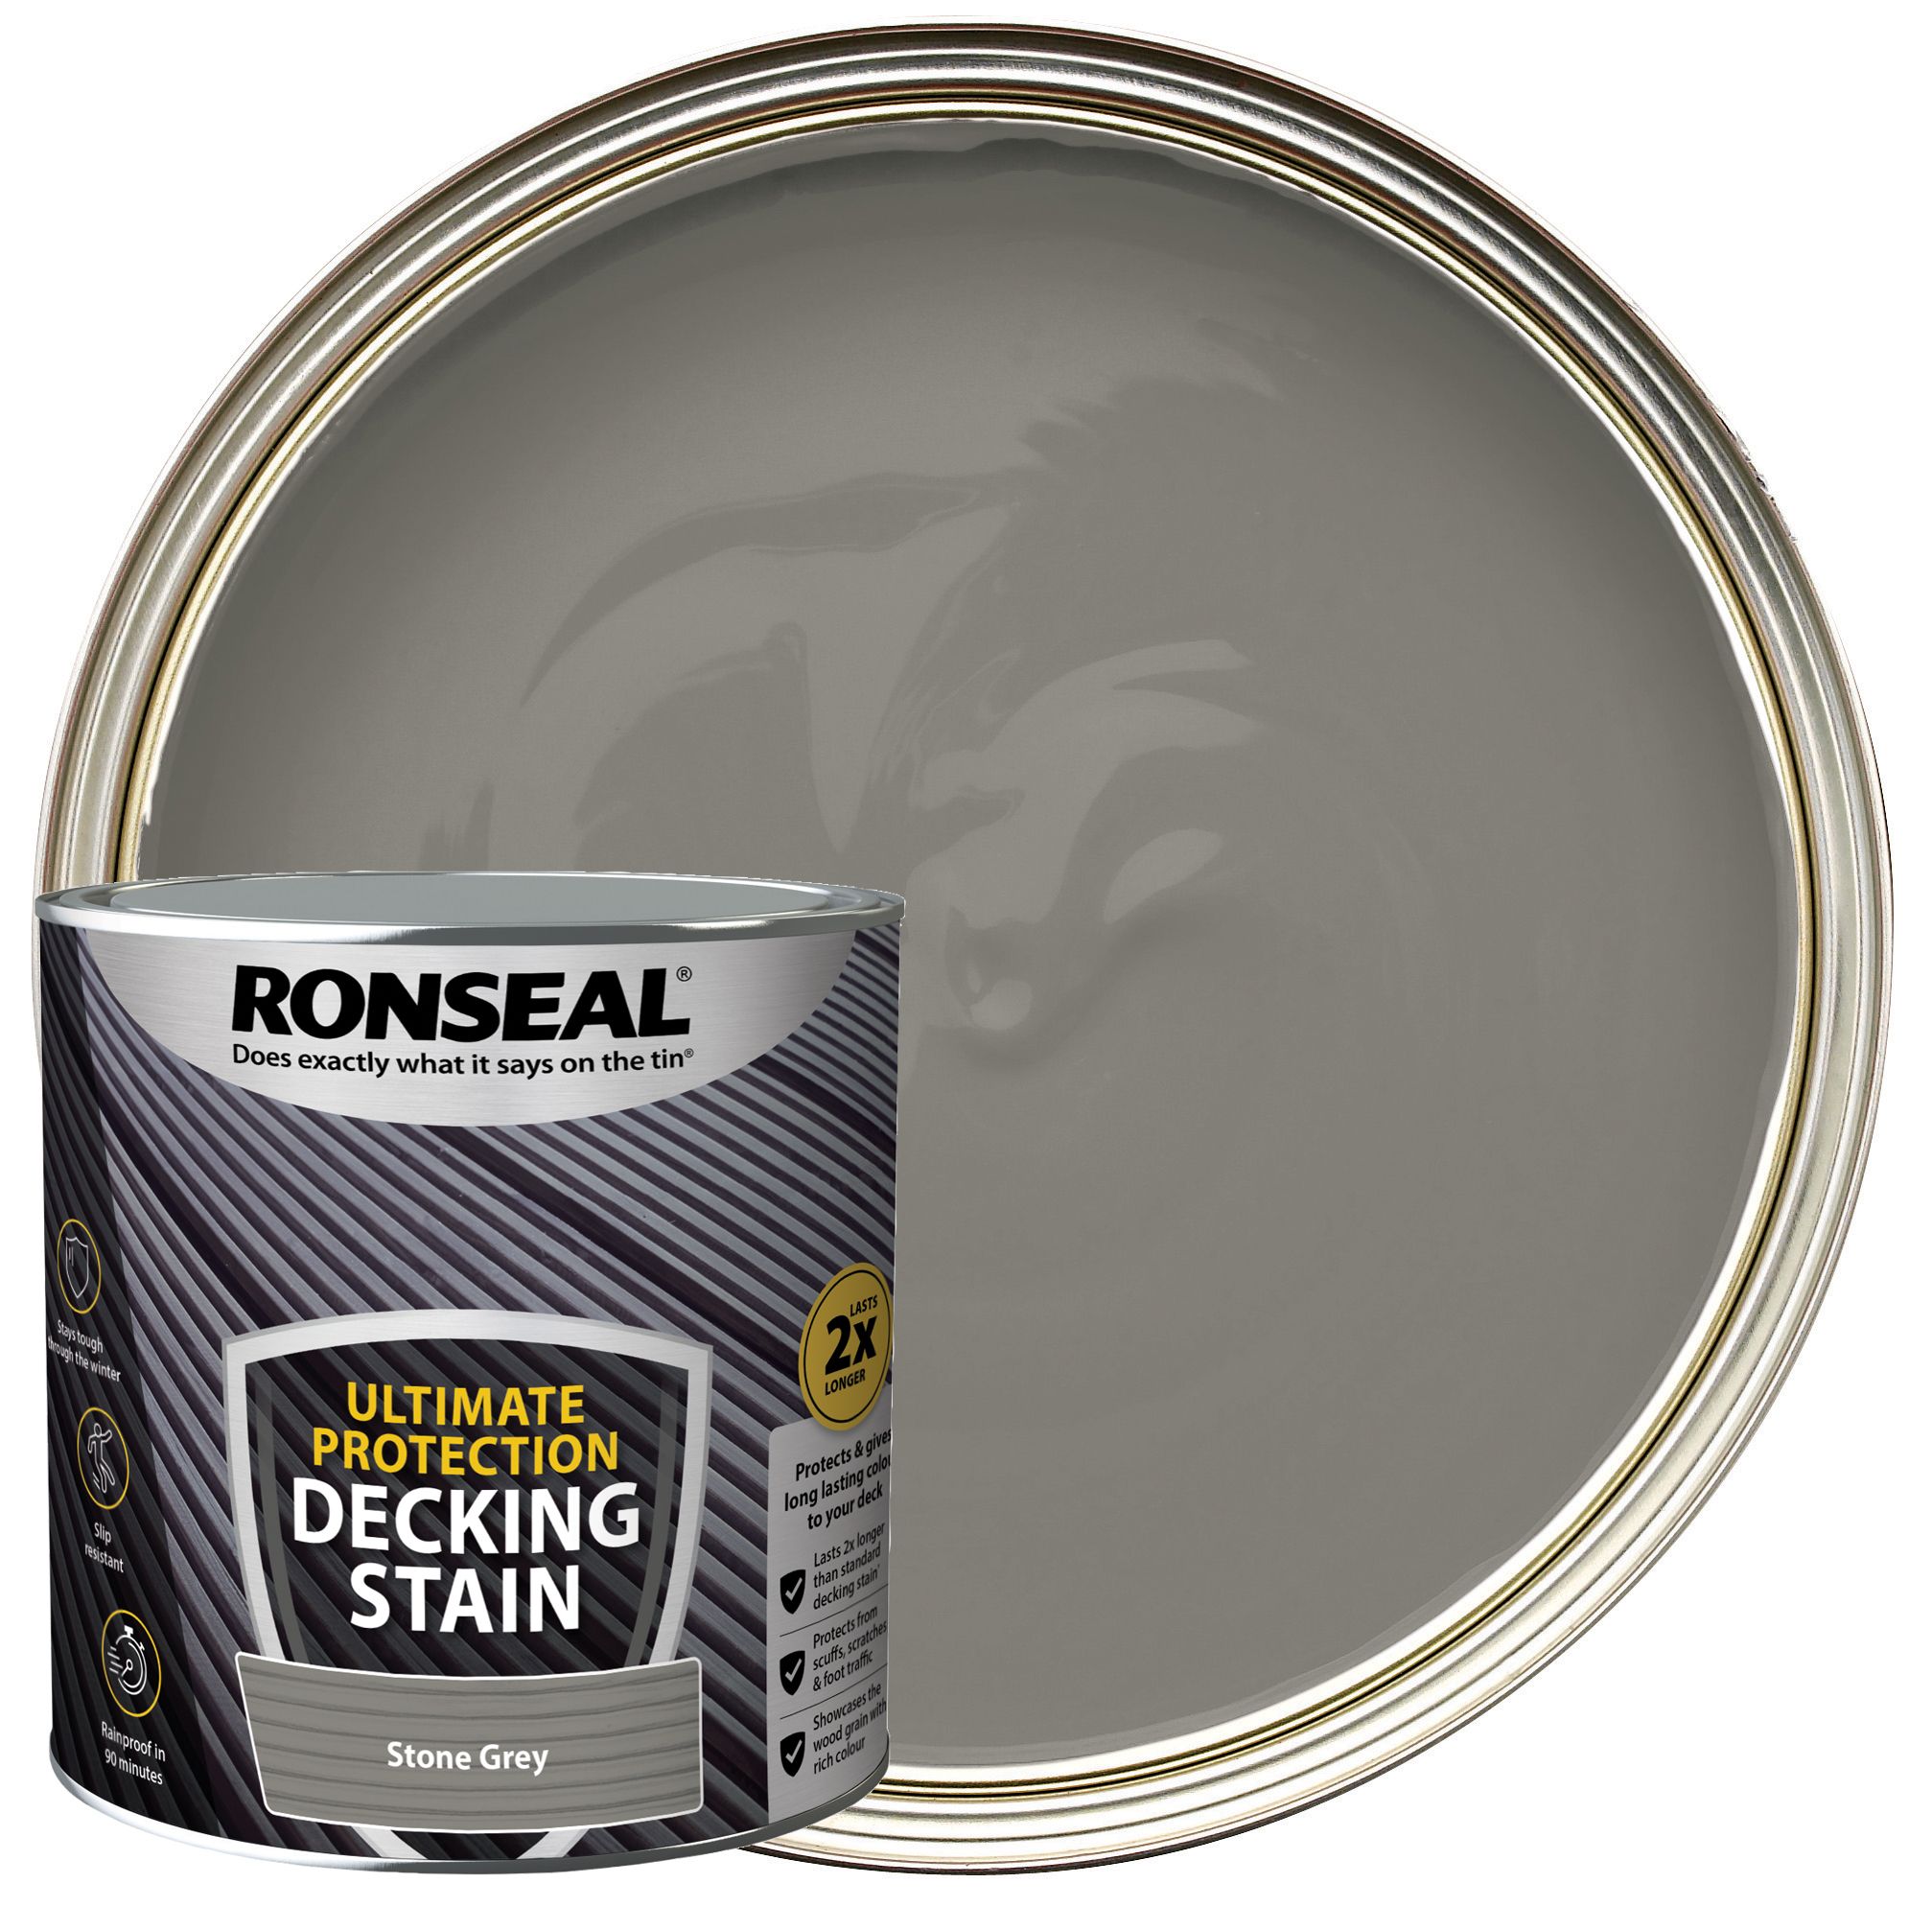 Image of Ronseal Ultimate Protection Stone Grey Decking Stain - 2.5L